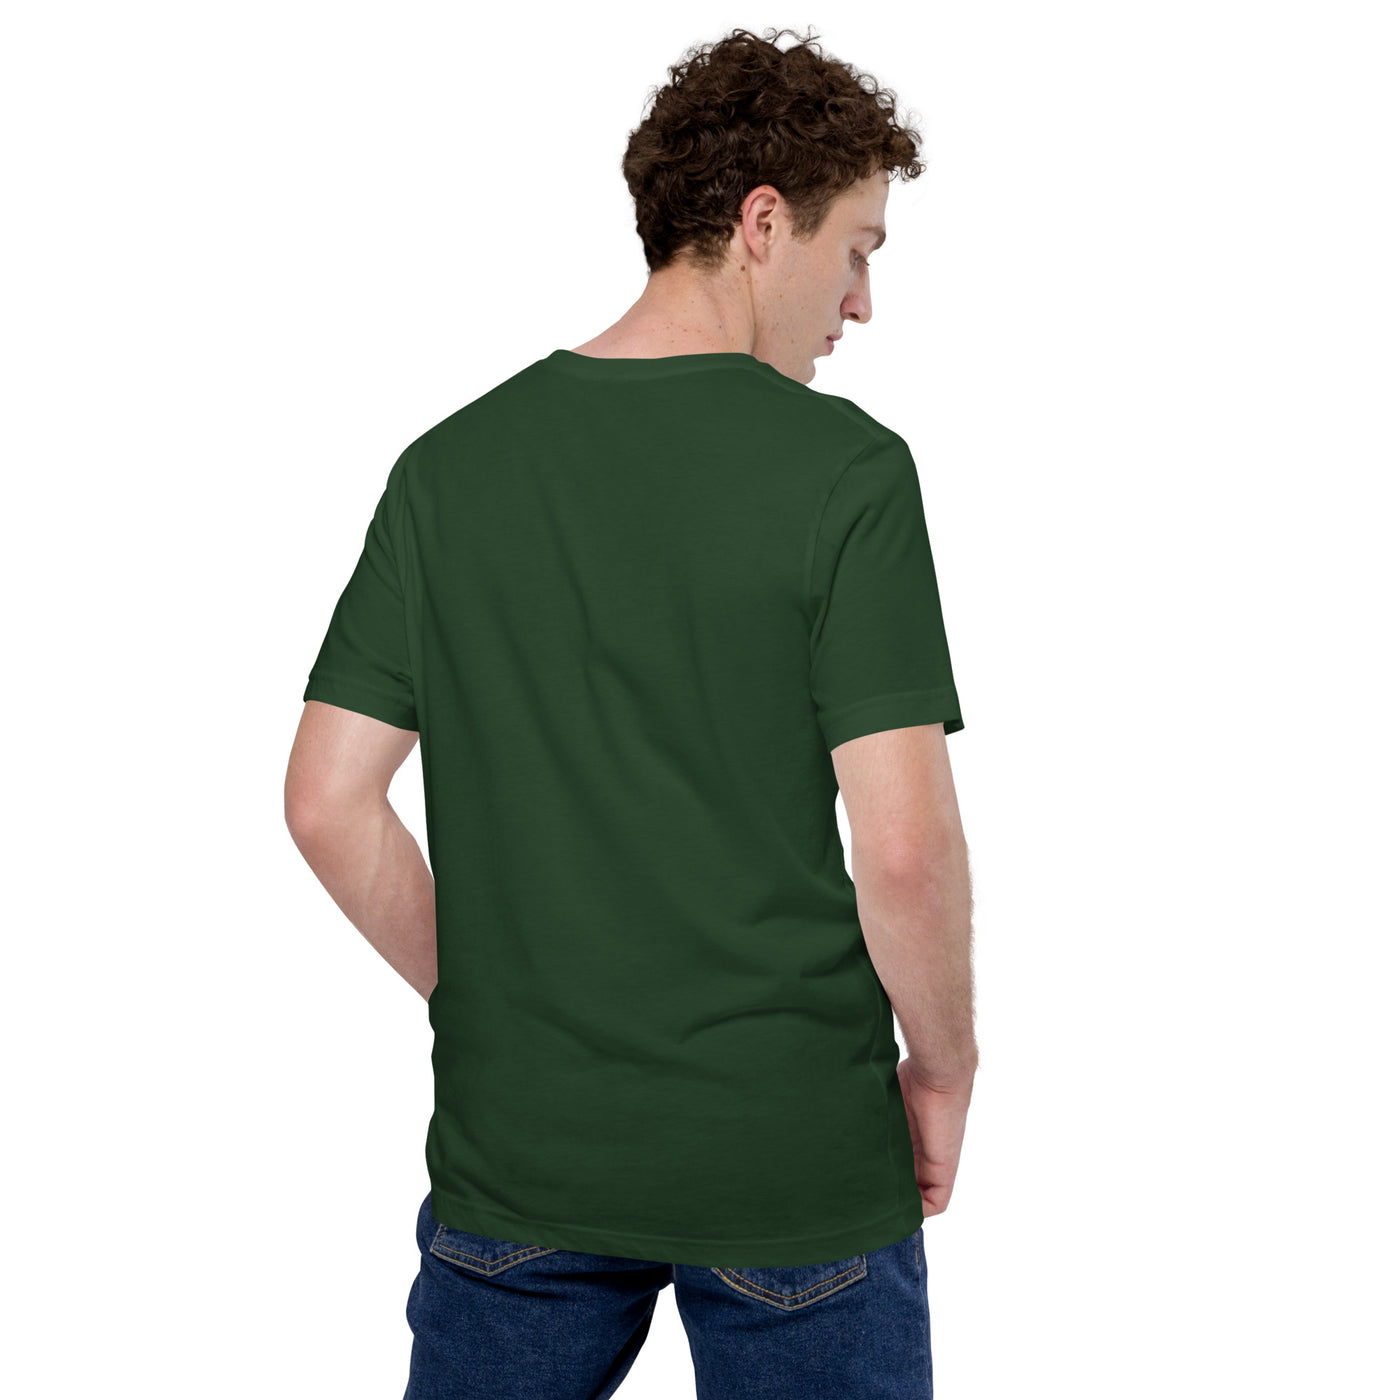 Life has its ups and downs; I call it Day Trading - Unisex t-shirt